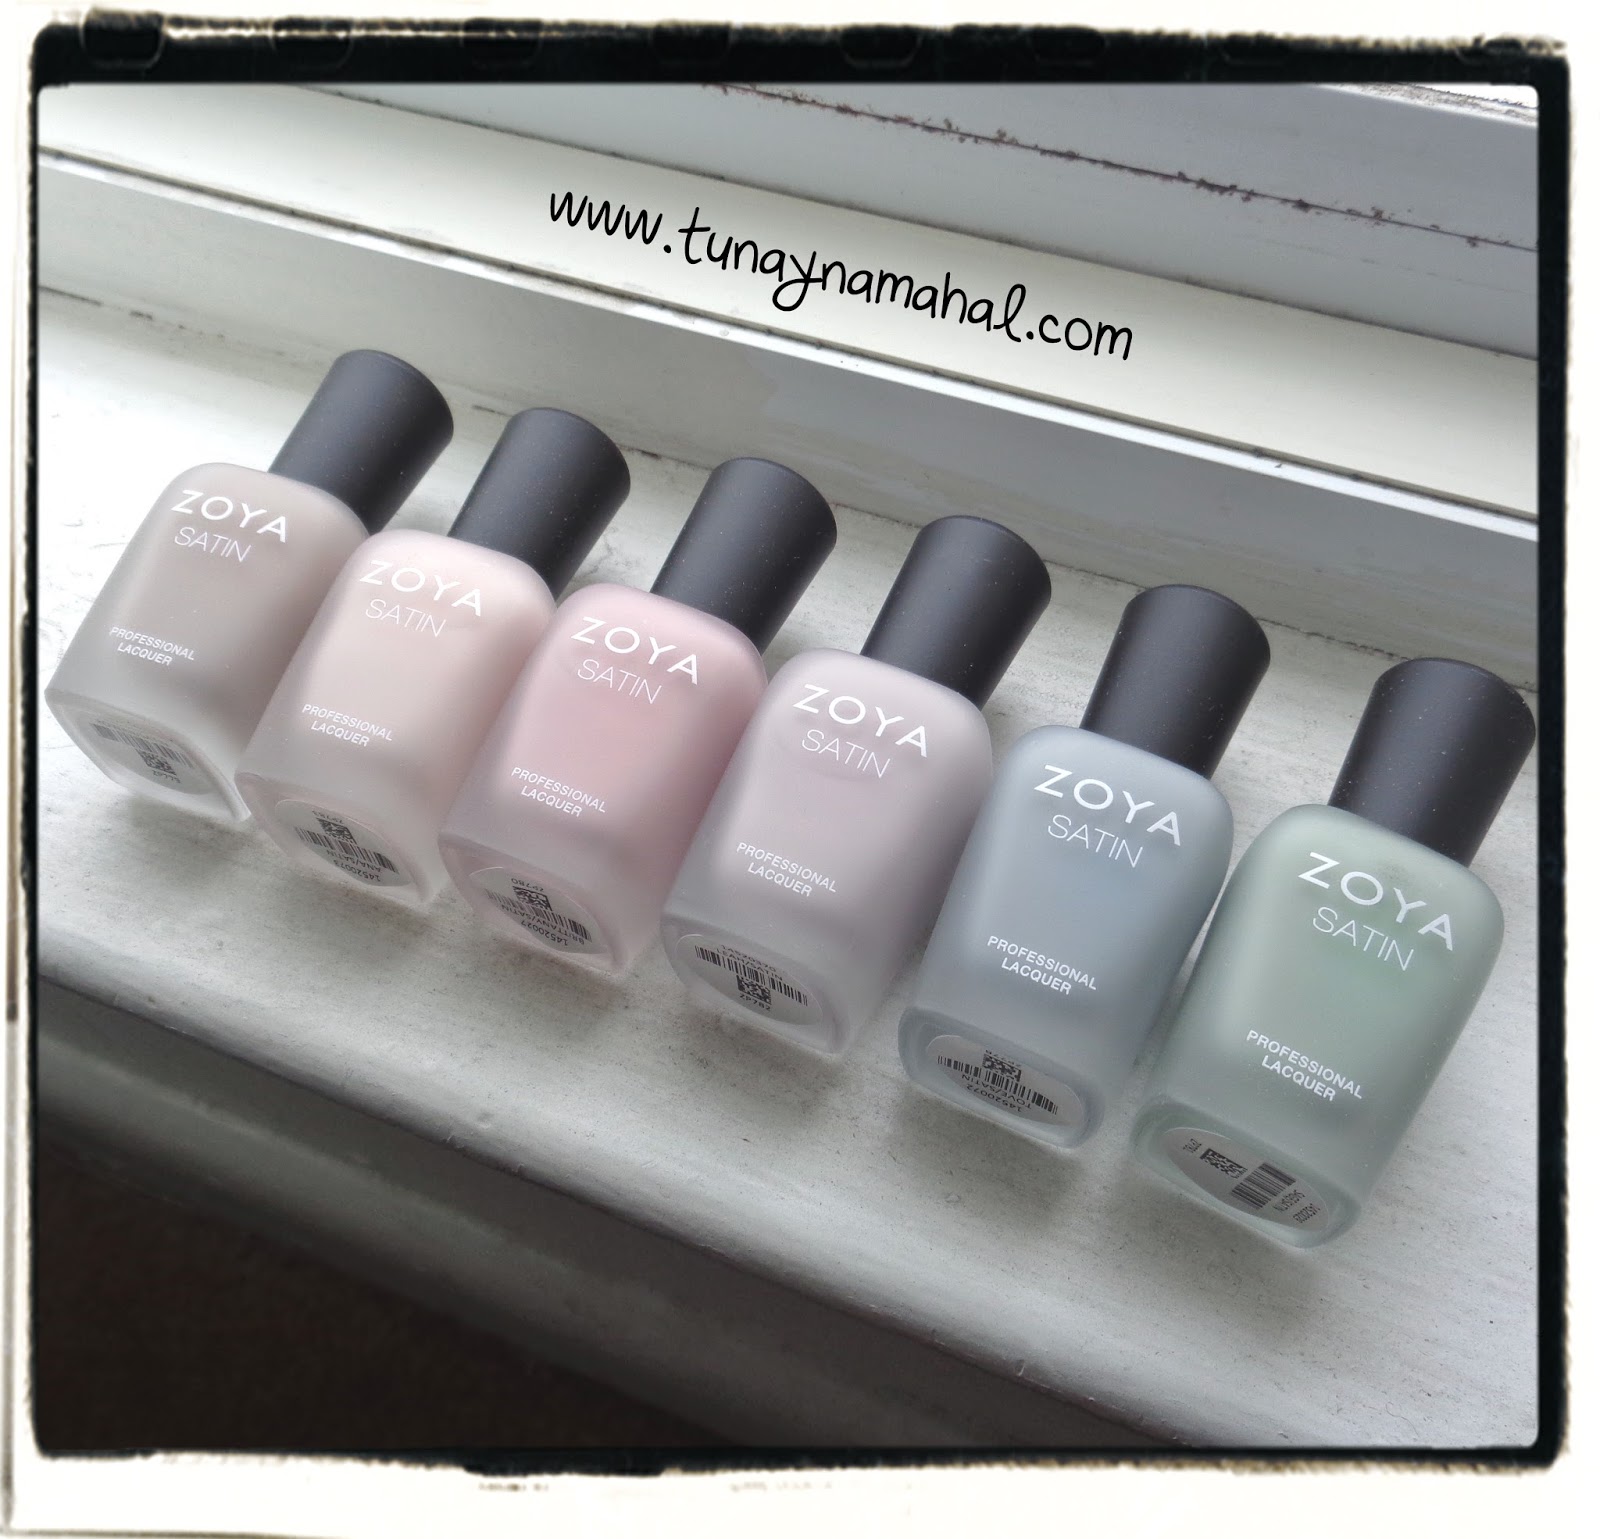 Pointless Cafe: Zoya Naturel Satin Collection 2015 - Swatches and Review